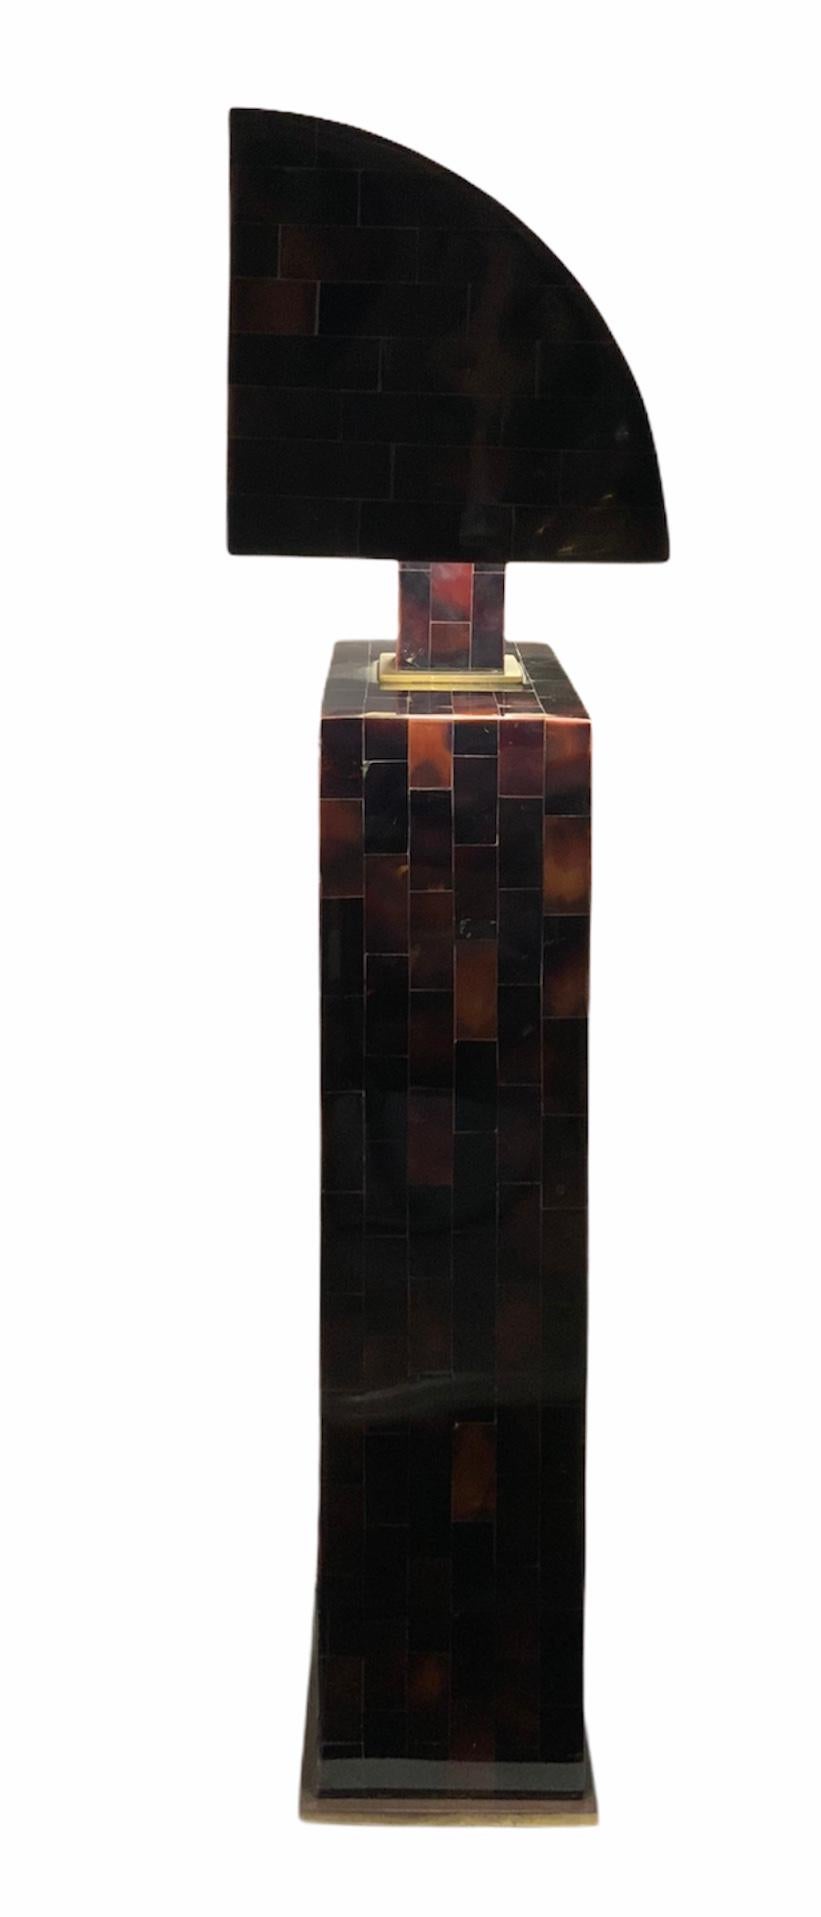 This is a sculptural wide heavy lamp shaped as a rectangular block in the lower part and as a ninety degree angle semi-tunnel in the upper part. Both parts are joined by a solid rectangular block. The whole sculpture is covered by small rectangular